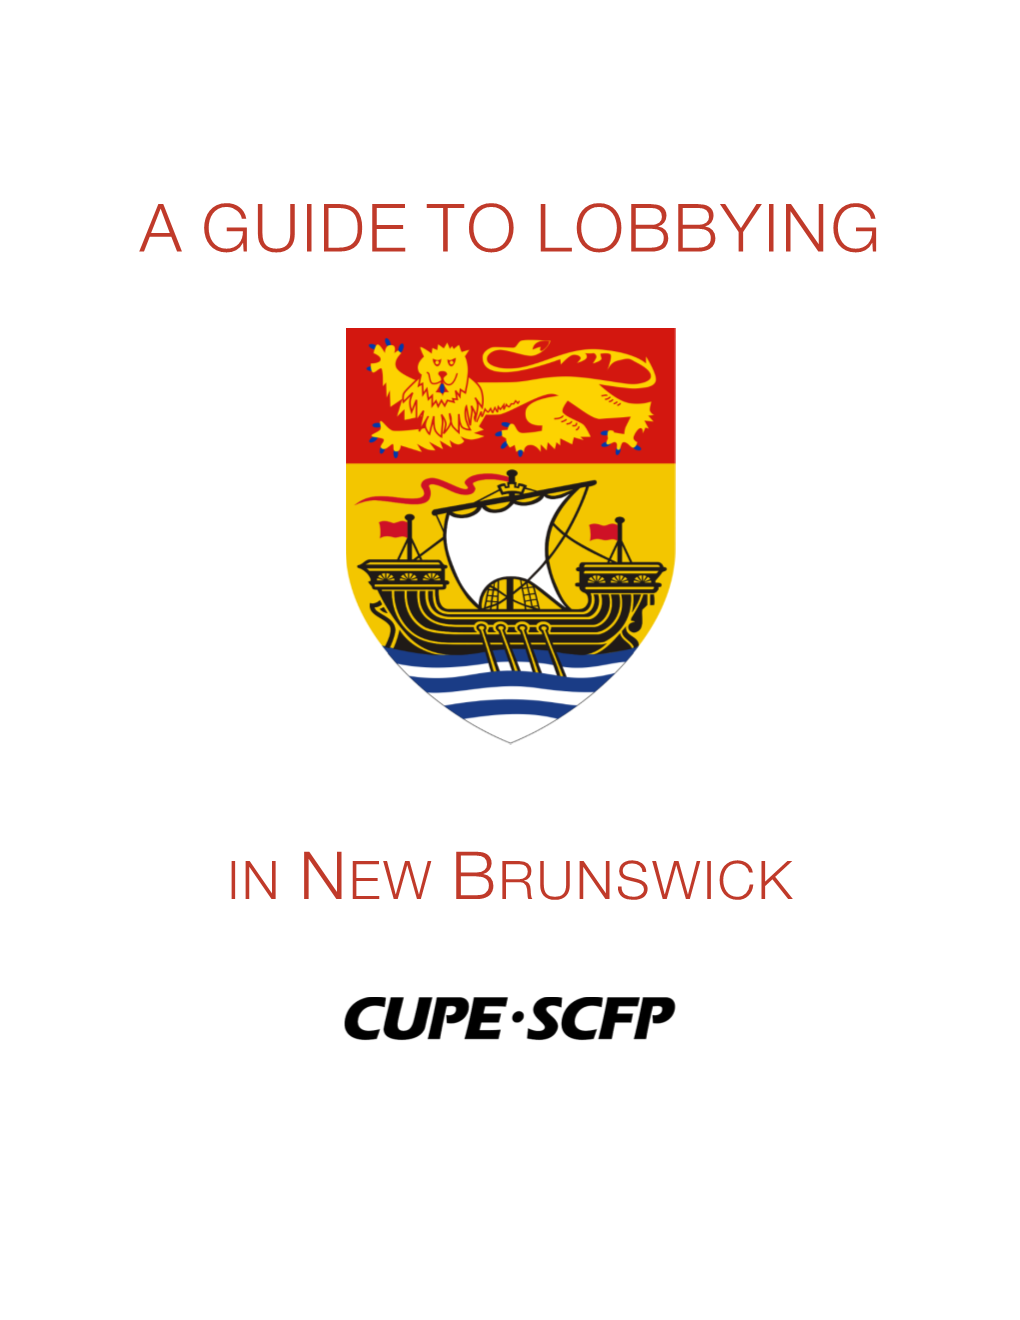 A Guide to Lobbying